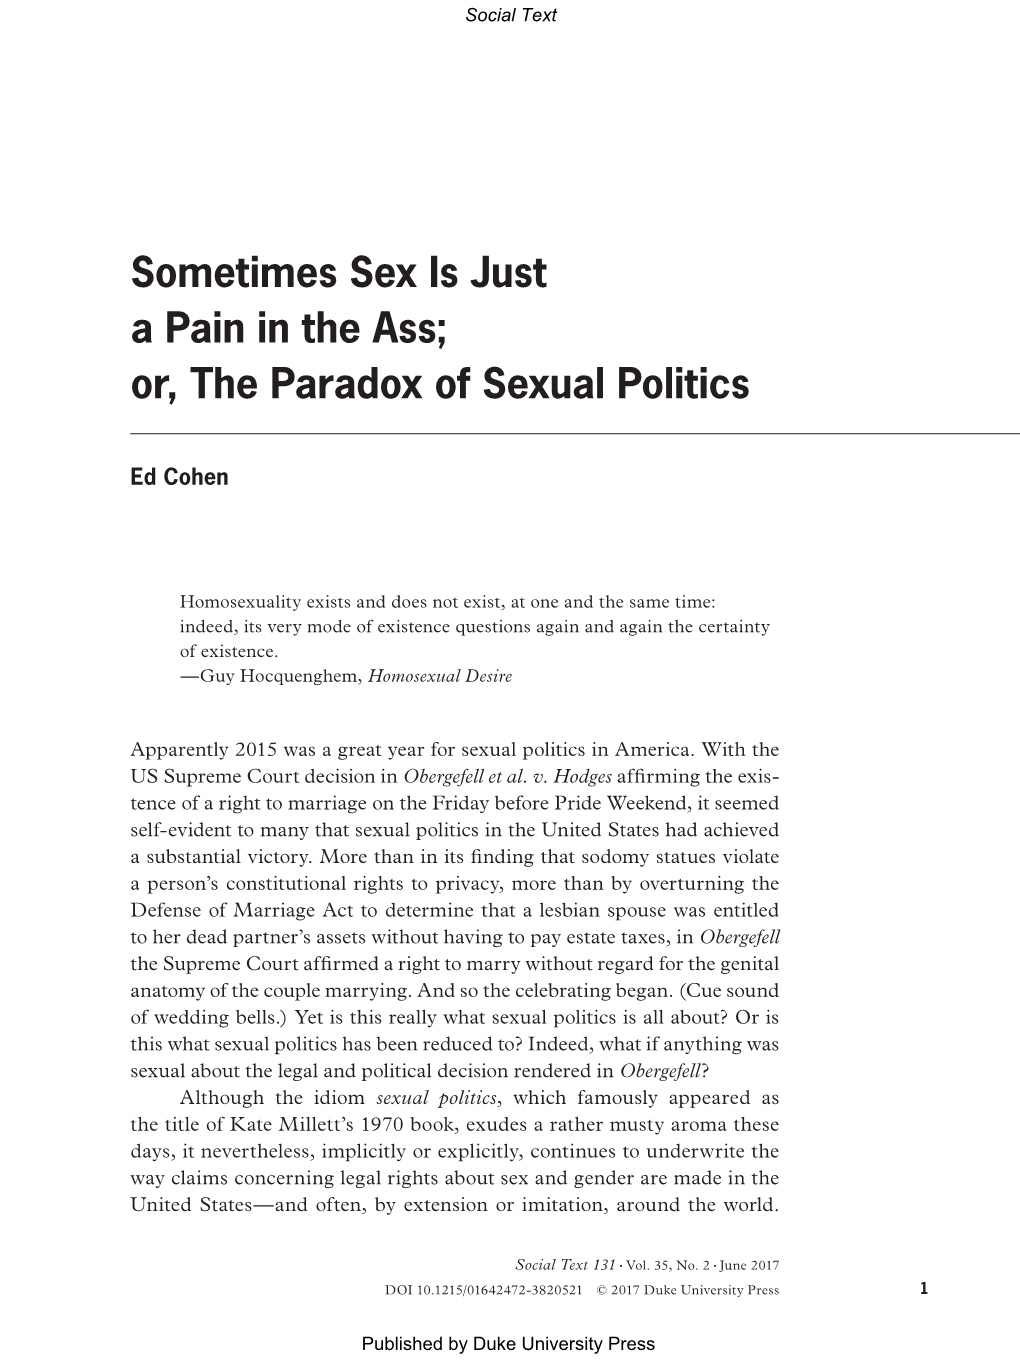 Sometimes Sex Is Just a Pain in the Ass; Or, the Paradox of Sexual Politics